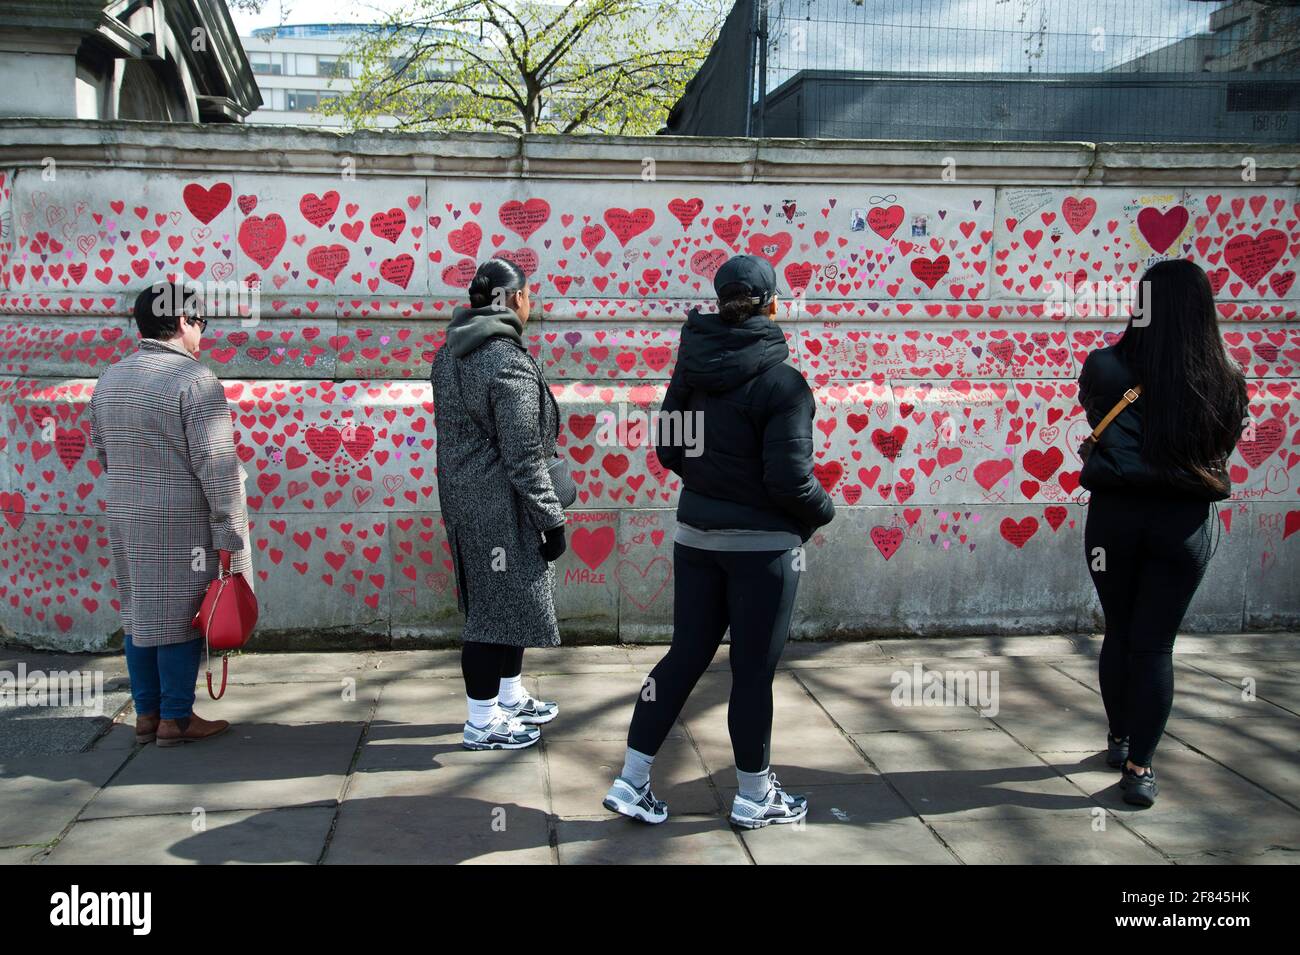 Southbank, London, England, UK. National Covid Memorial Wall. A group of young people look at the red hearts to commerate those who died of Covid. Stock Photo